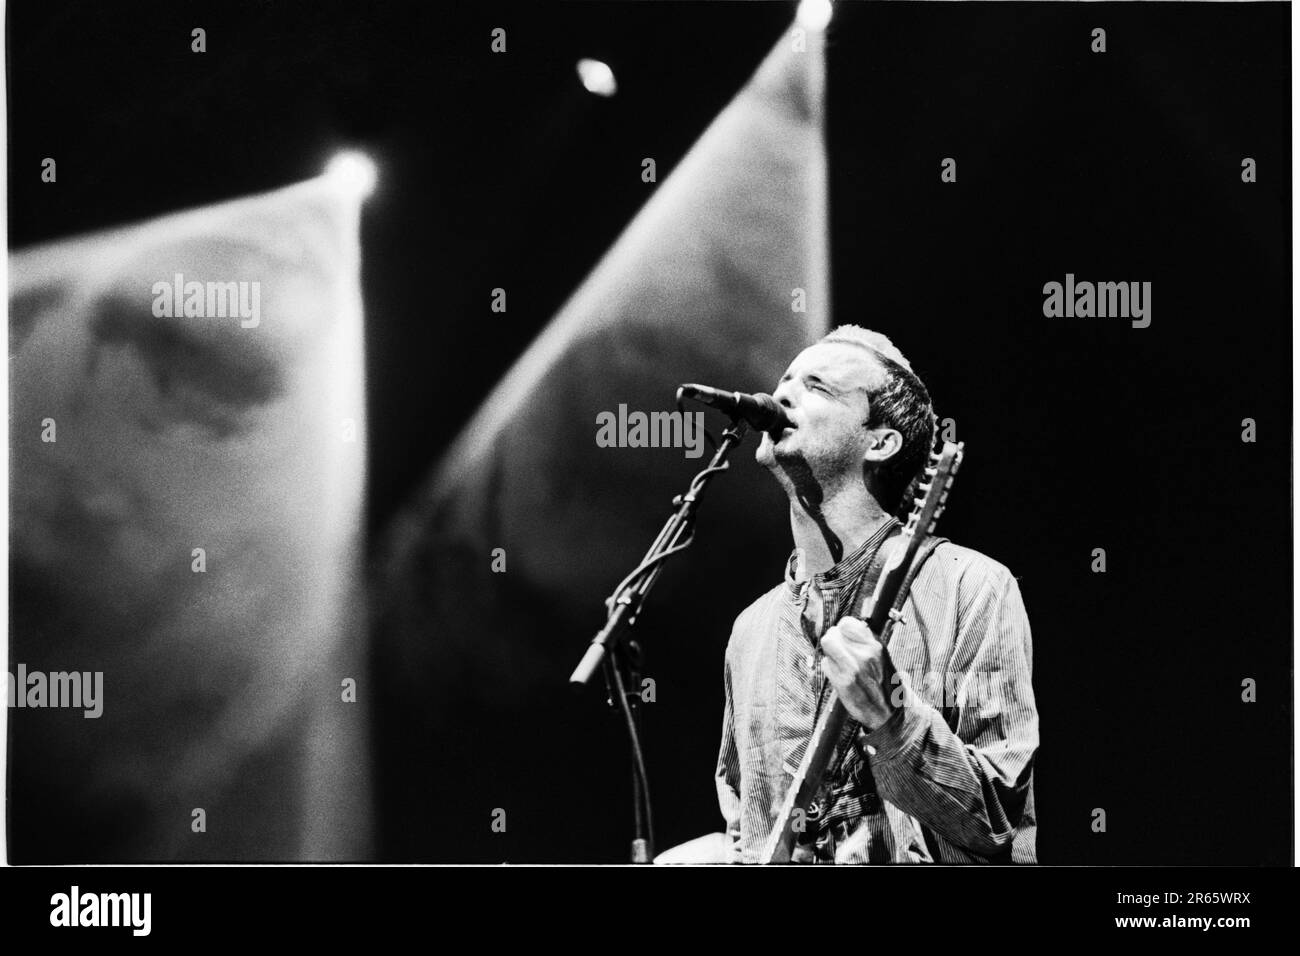 Fran Healey of Travis playing live at Reading Festival on 24 August 2001 in Reading, Engliand, UK. Photo: Rob Watkins Stock Photo